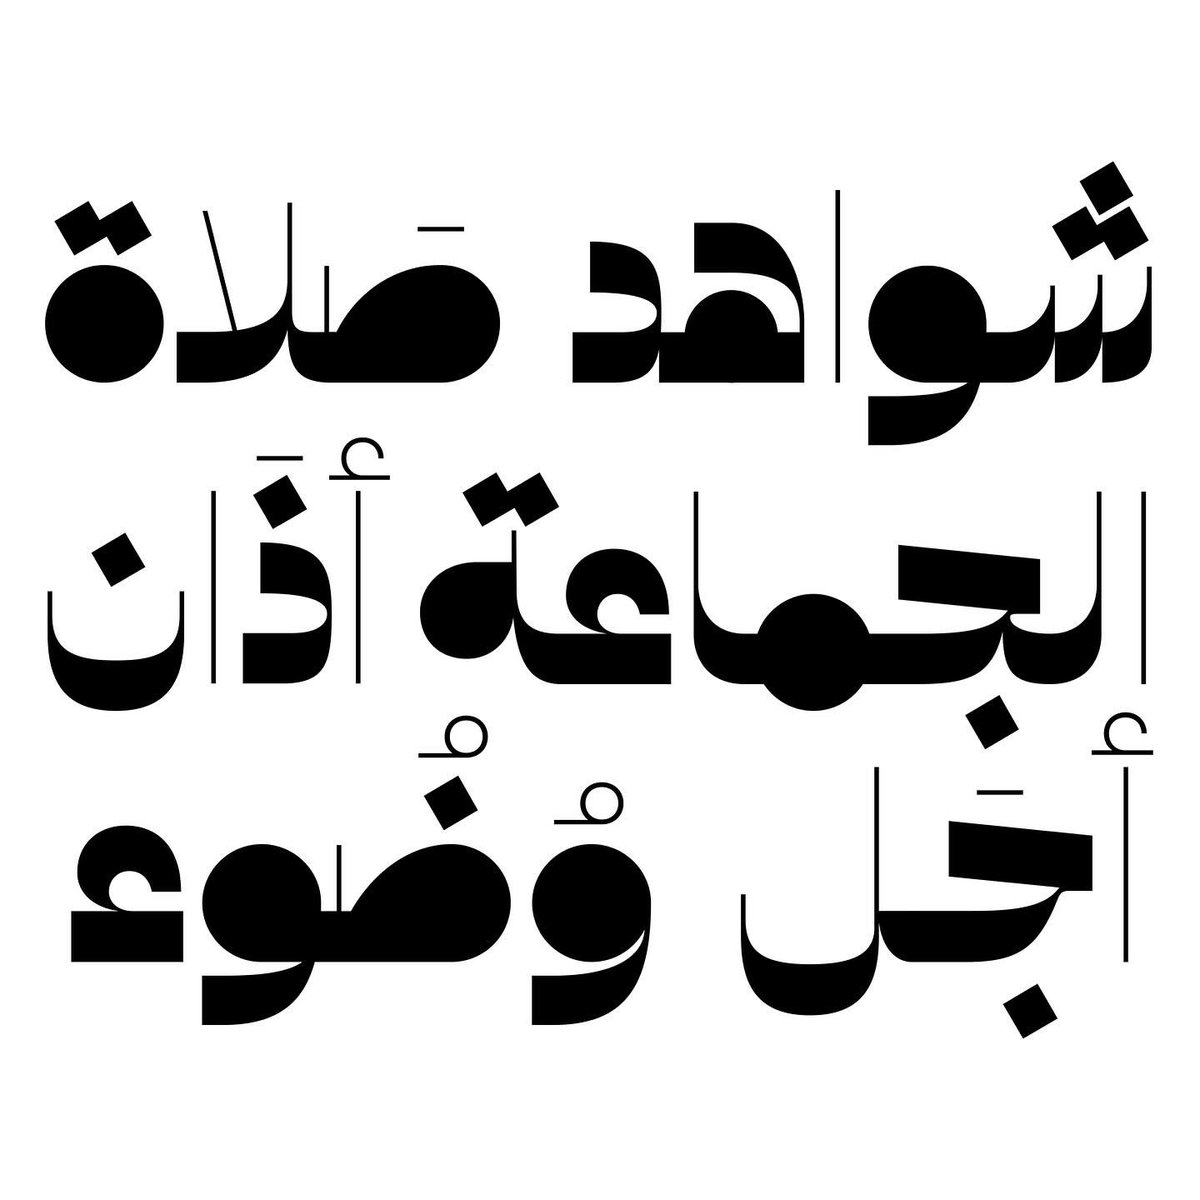 2/3 The unique typography that we crafted for the logo was developed into a custom Arabic typeface used in the exhibition graphics, for all titles of the different key sections, galleries, & pavilions. The typeface reflected the minimal lettering style used in the logo,